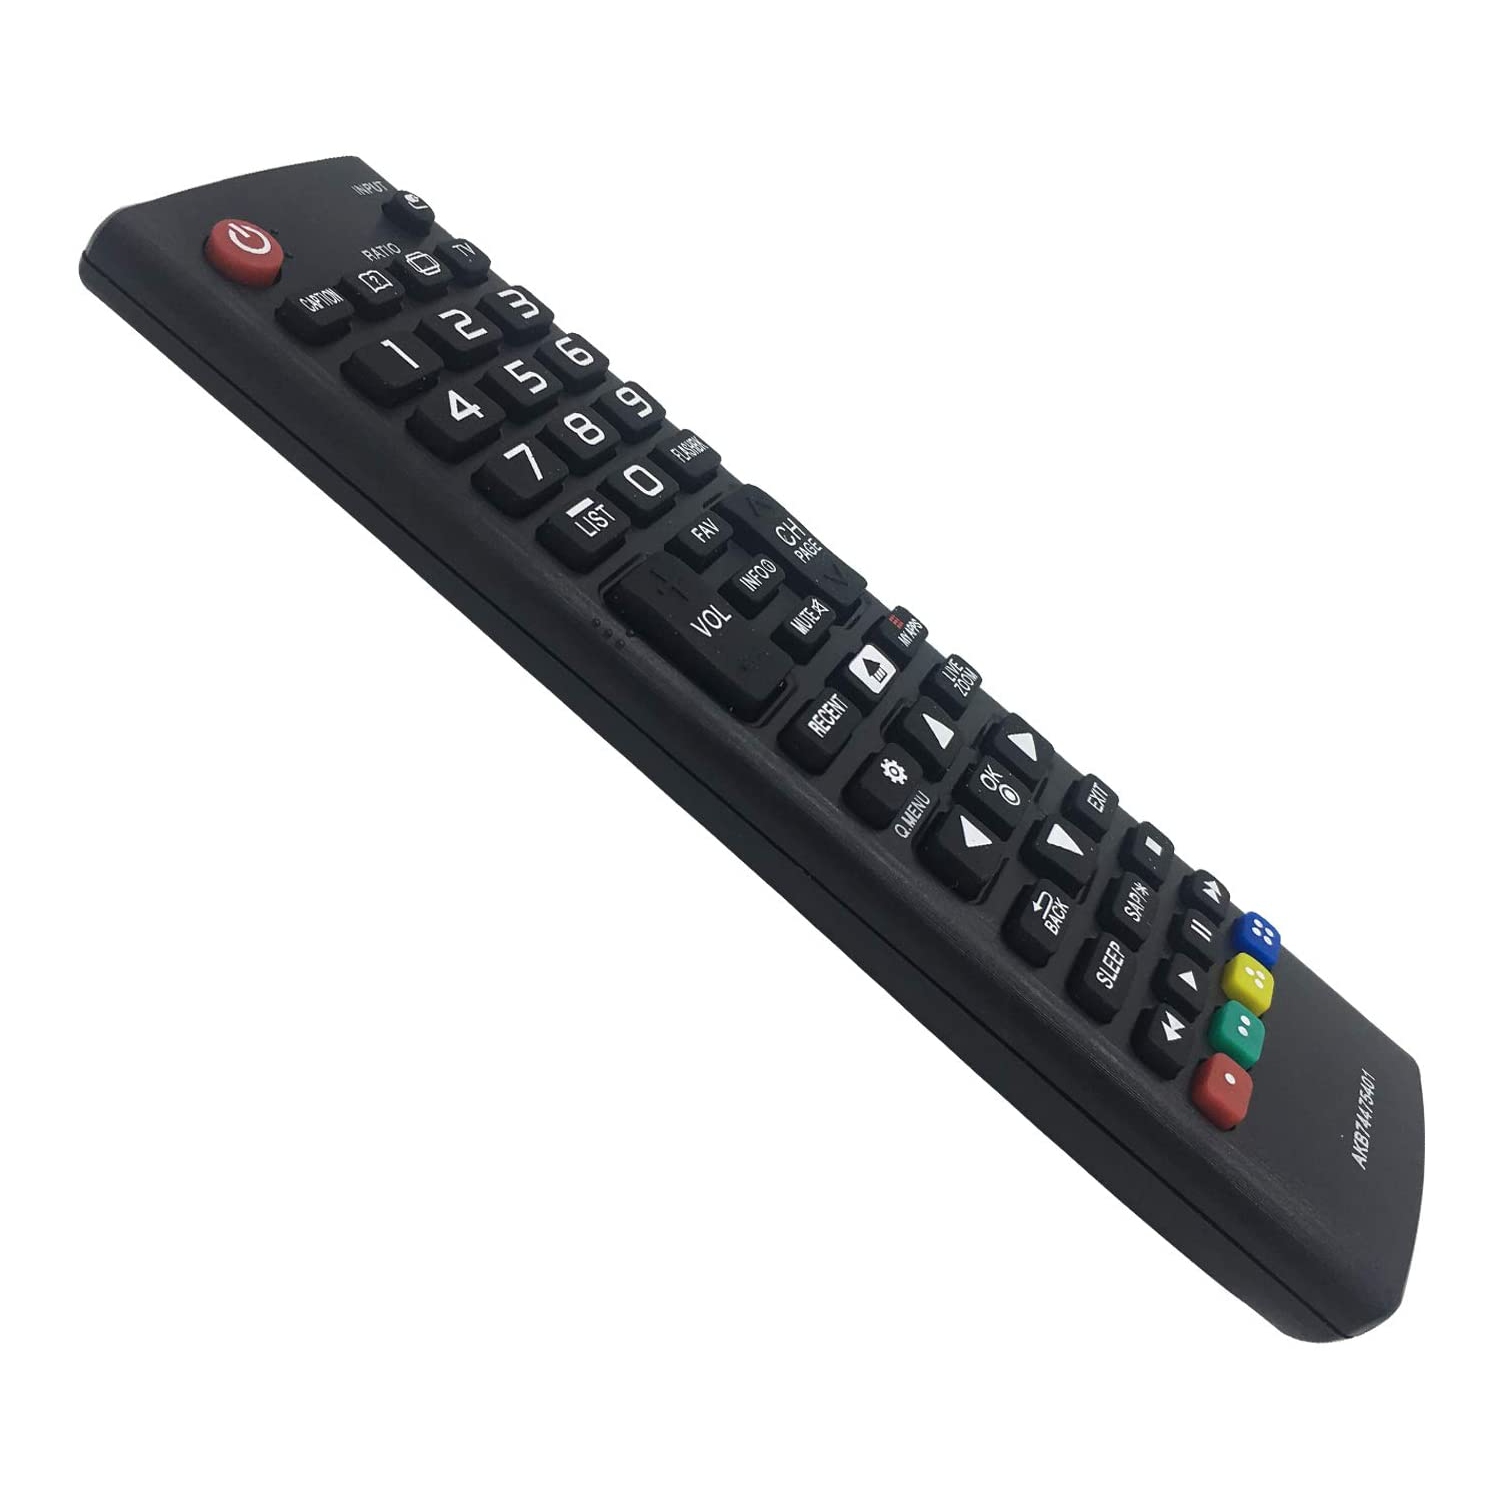 Replacement LG AKB74475401 Remote Control for LG LCD LED HD TV, No Programming Or Pairing Needed TV Remote Control Fit